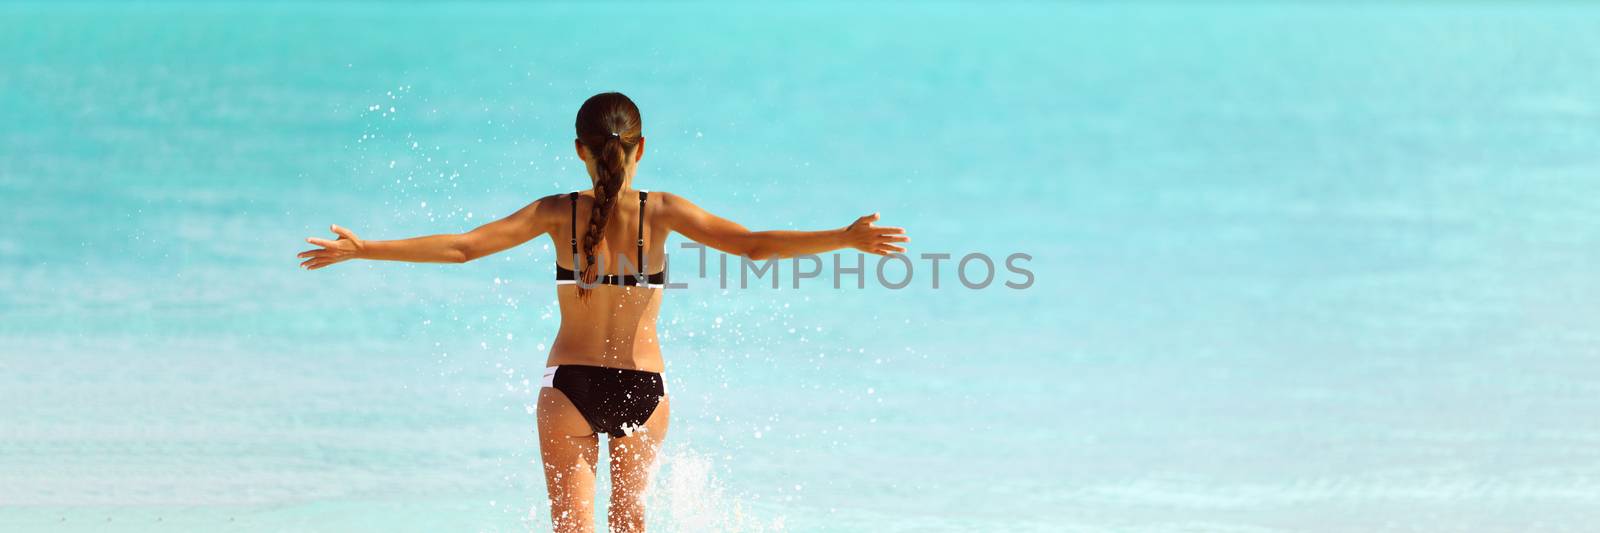 Happy bikini beach vacation woman running to ocean splashing water with open arms in freedom. Happiness carefree lifestyle banner with blue copyspace.